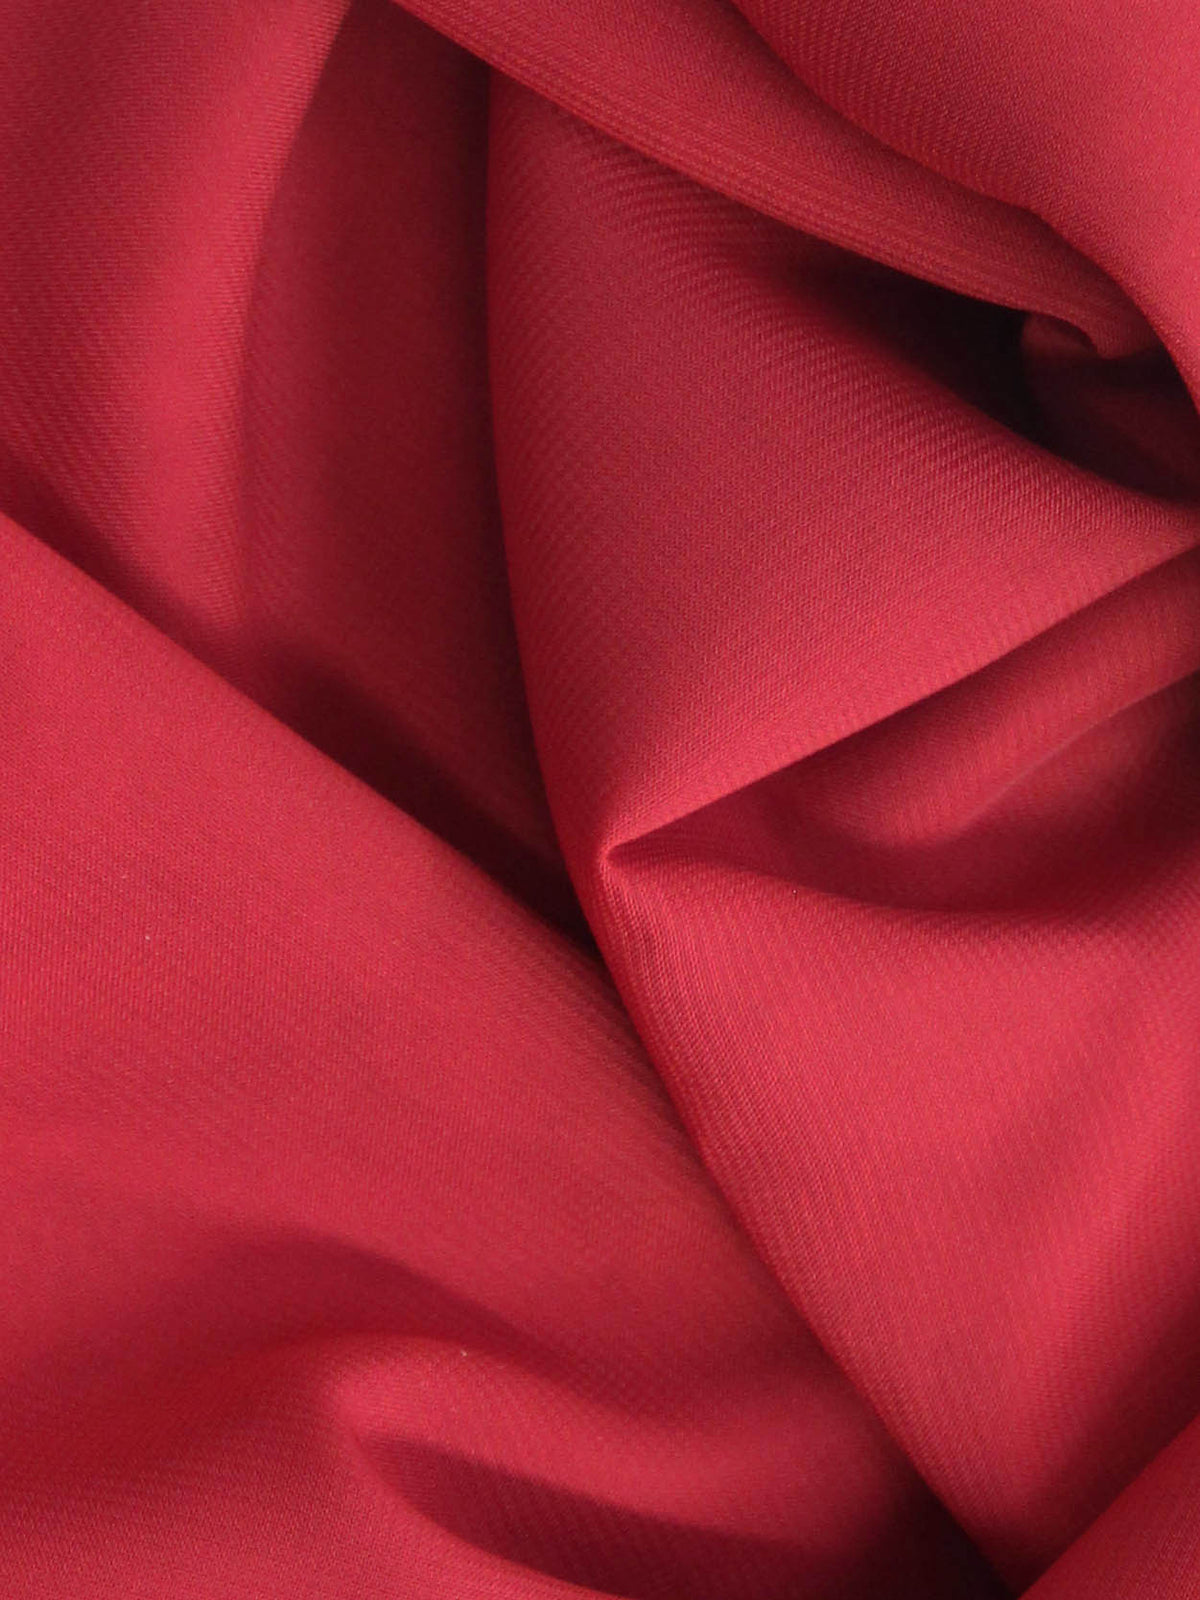 Roter Polyester-Chiffon (150 cm/59 Zoll) – Wohlwollen